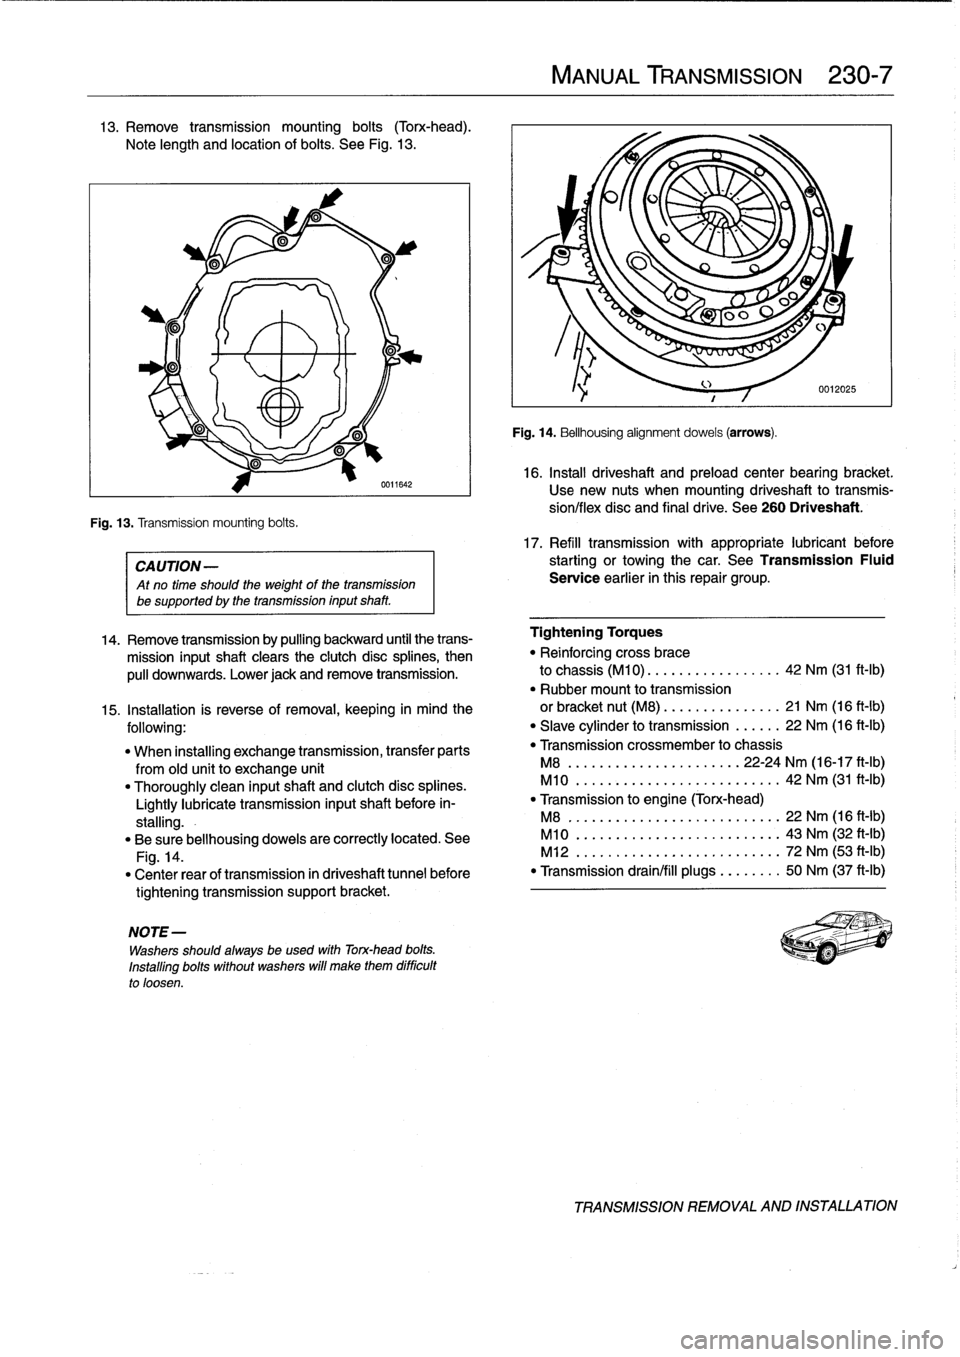 BMW 318i 1995 E36 Workshop Manual 13
.
Remove
transmission
mounting
bolts
(Torx-head)
.

Note
length
and
location
of
bolts
.
See
Fig
.
13
.

Fig
.
13
.
Transmission
mounting
bolts
.

0611642

CA
UTION-

Atno
time
should
the
weight
of
